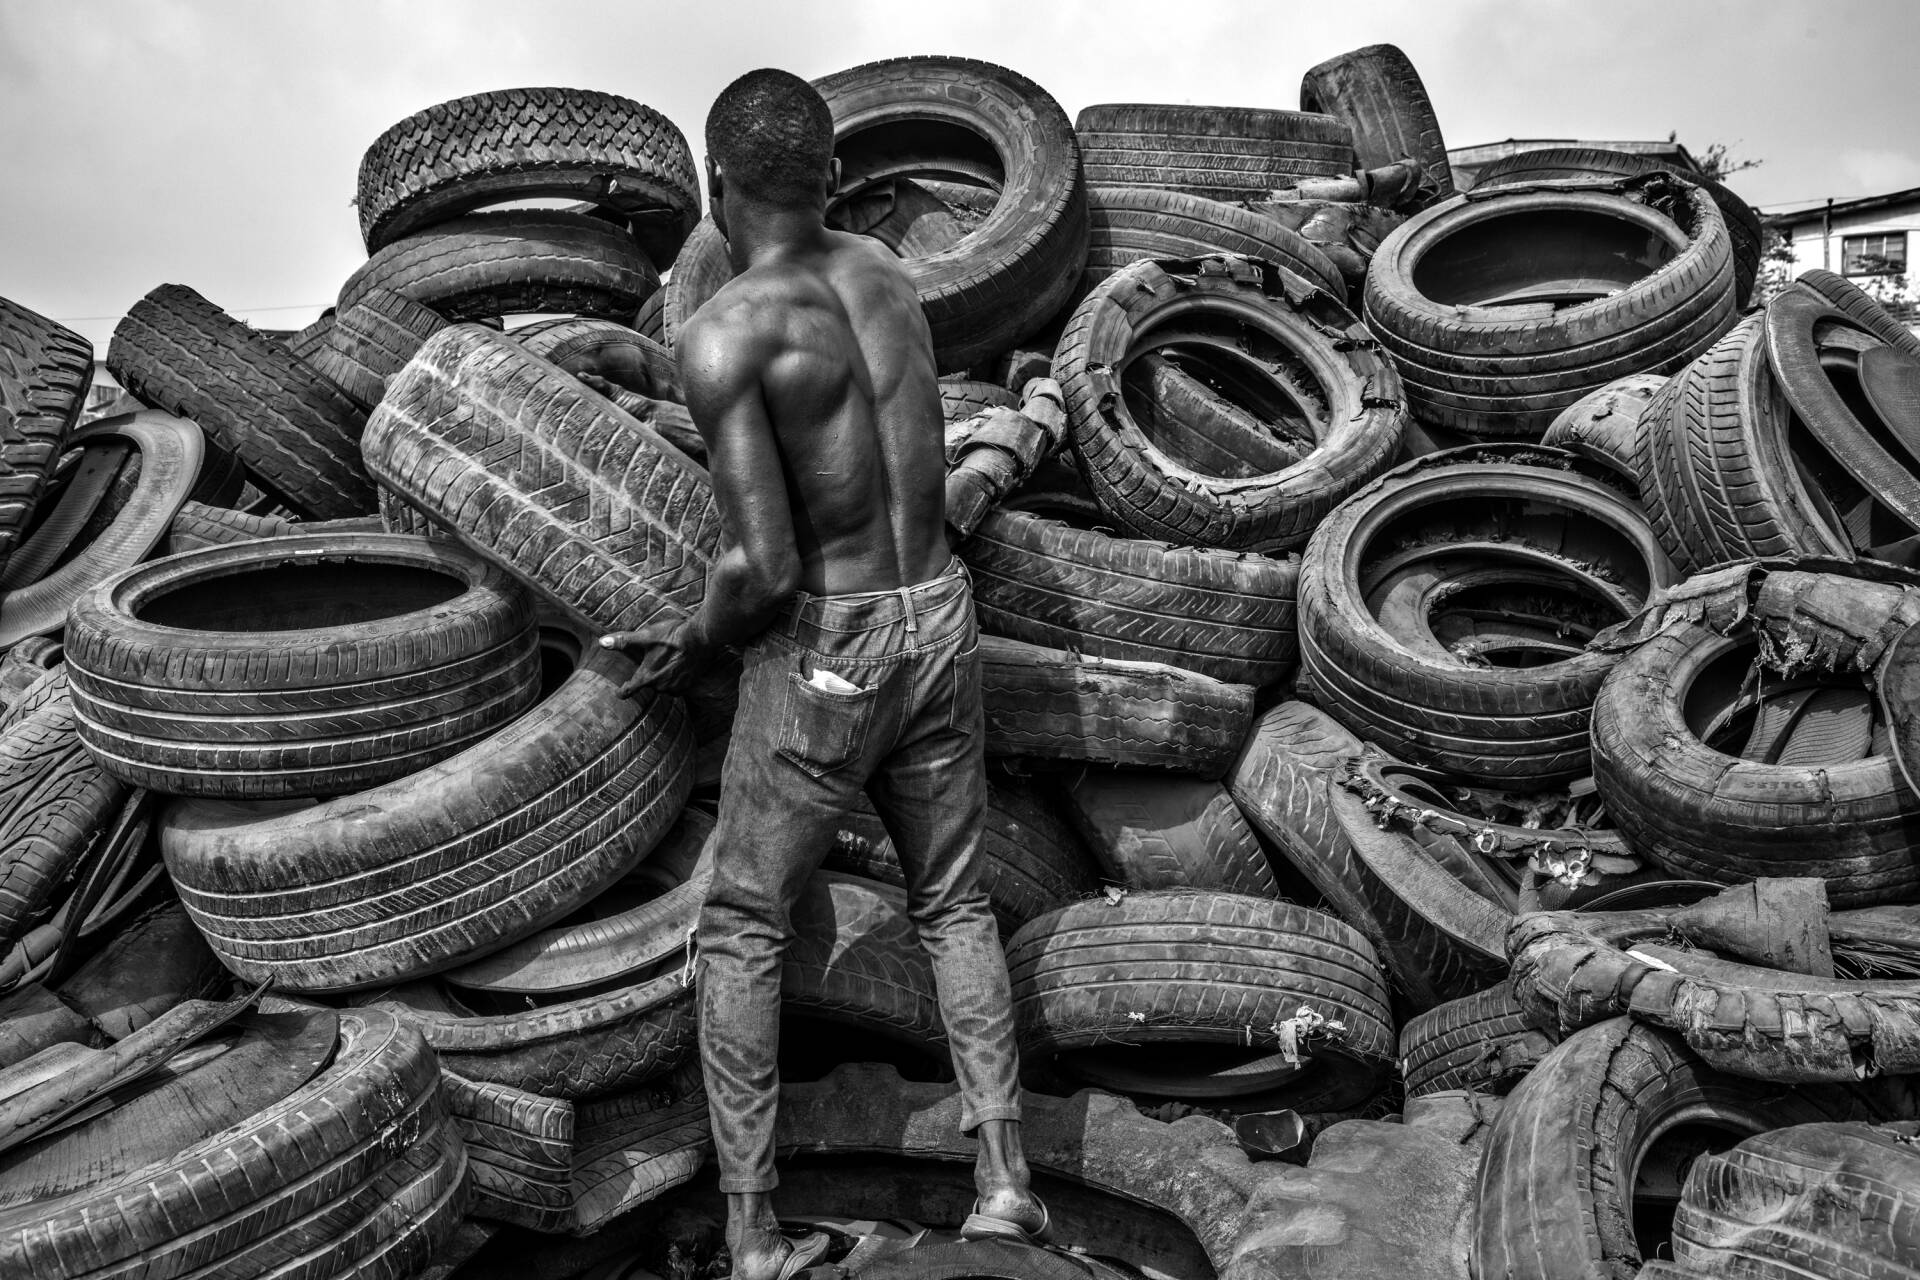 A man is pictured stacking a tyre onto a pile of used tyres